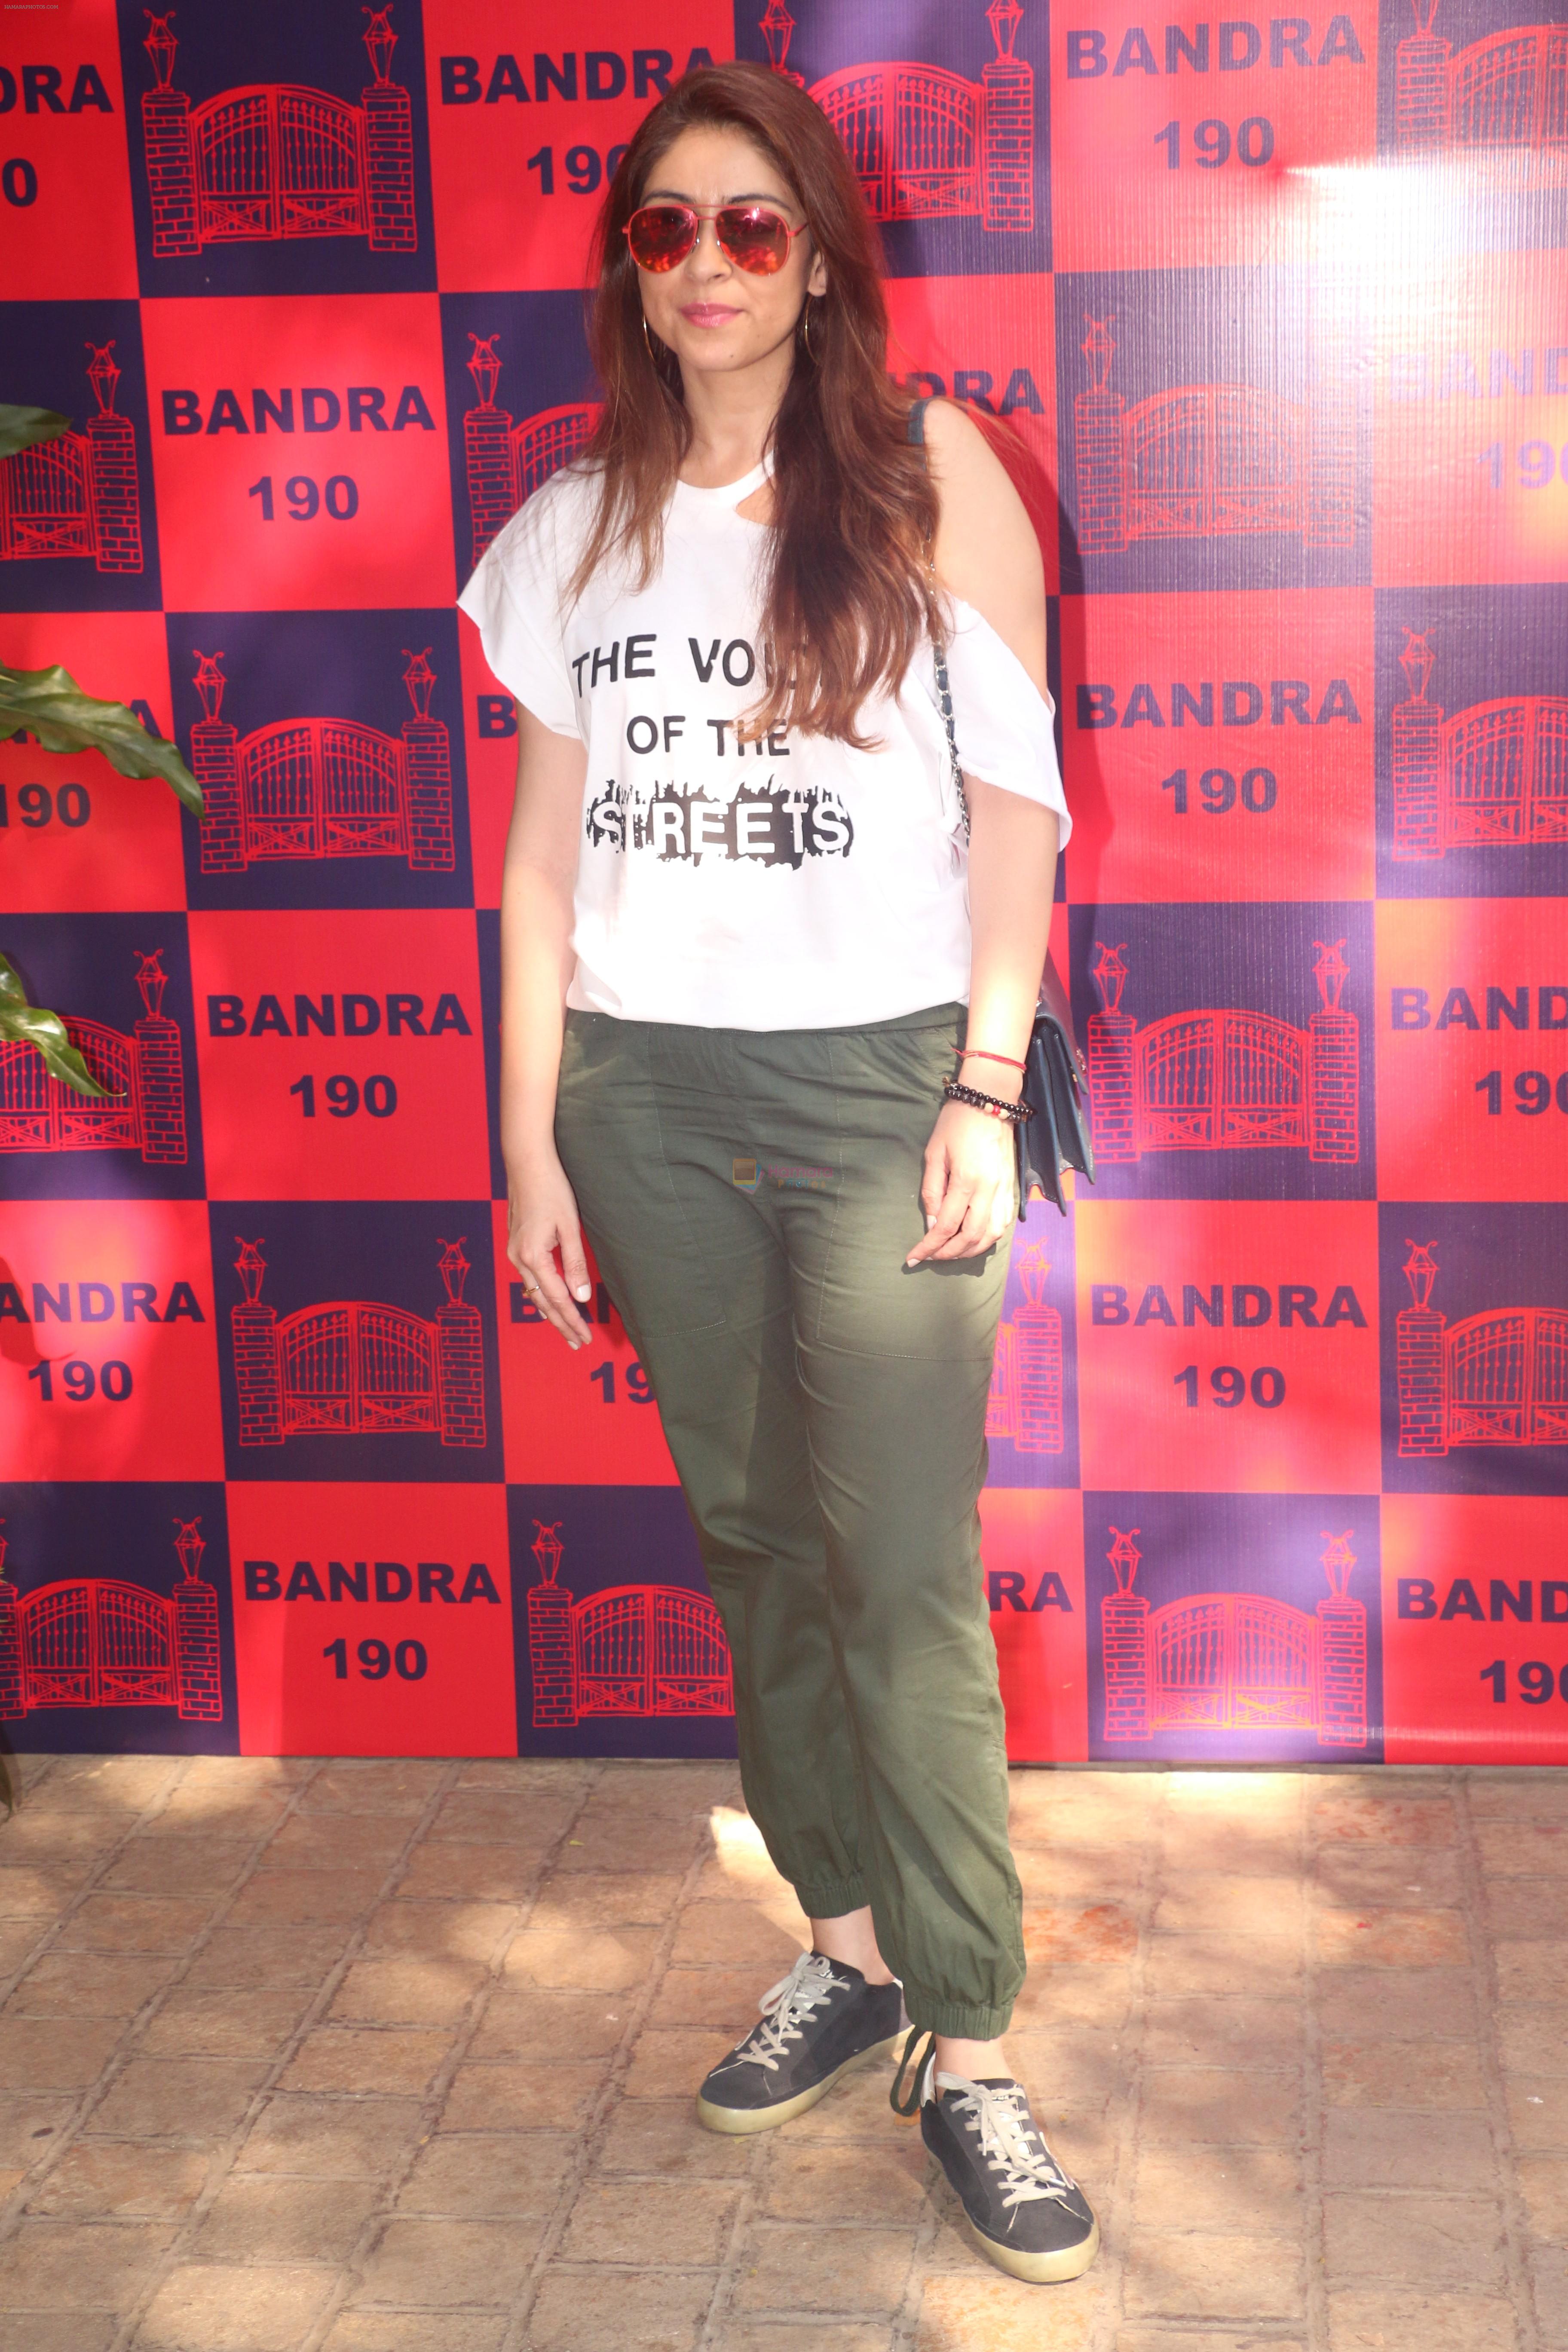 attend a fashion event at Bandra190 on 21st Feb 2019